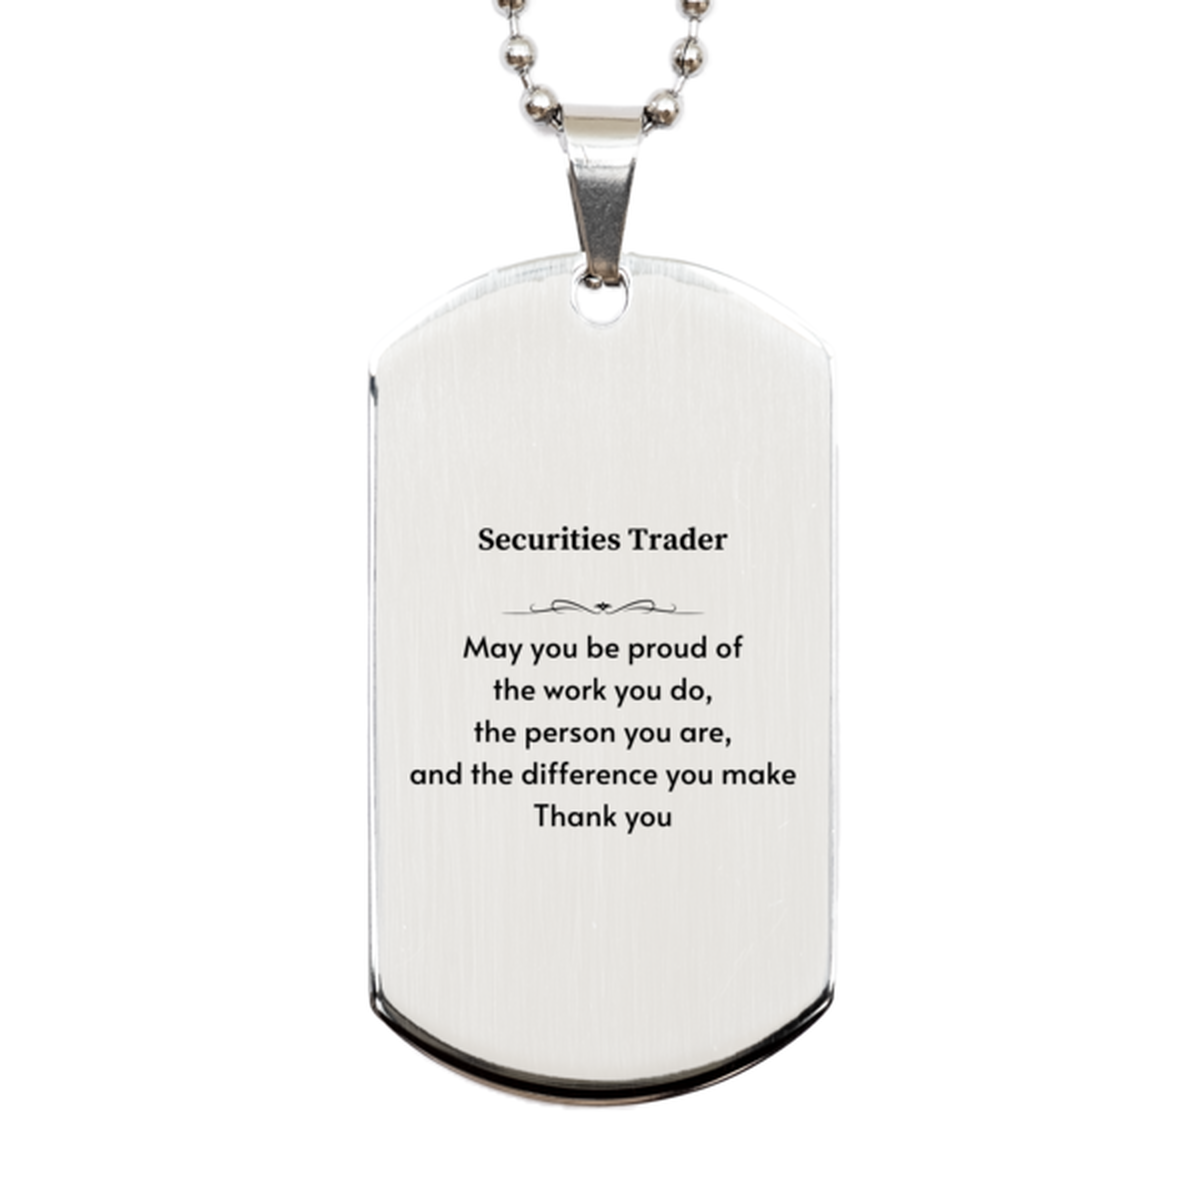 Heartwarming Silver Dog Tag Retirement Coworkers Gifts for Securities Trader, Securities Trader May You be proud of the work you do, the person you are Gifts for Boss Men Women Friends